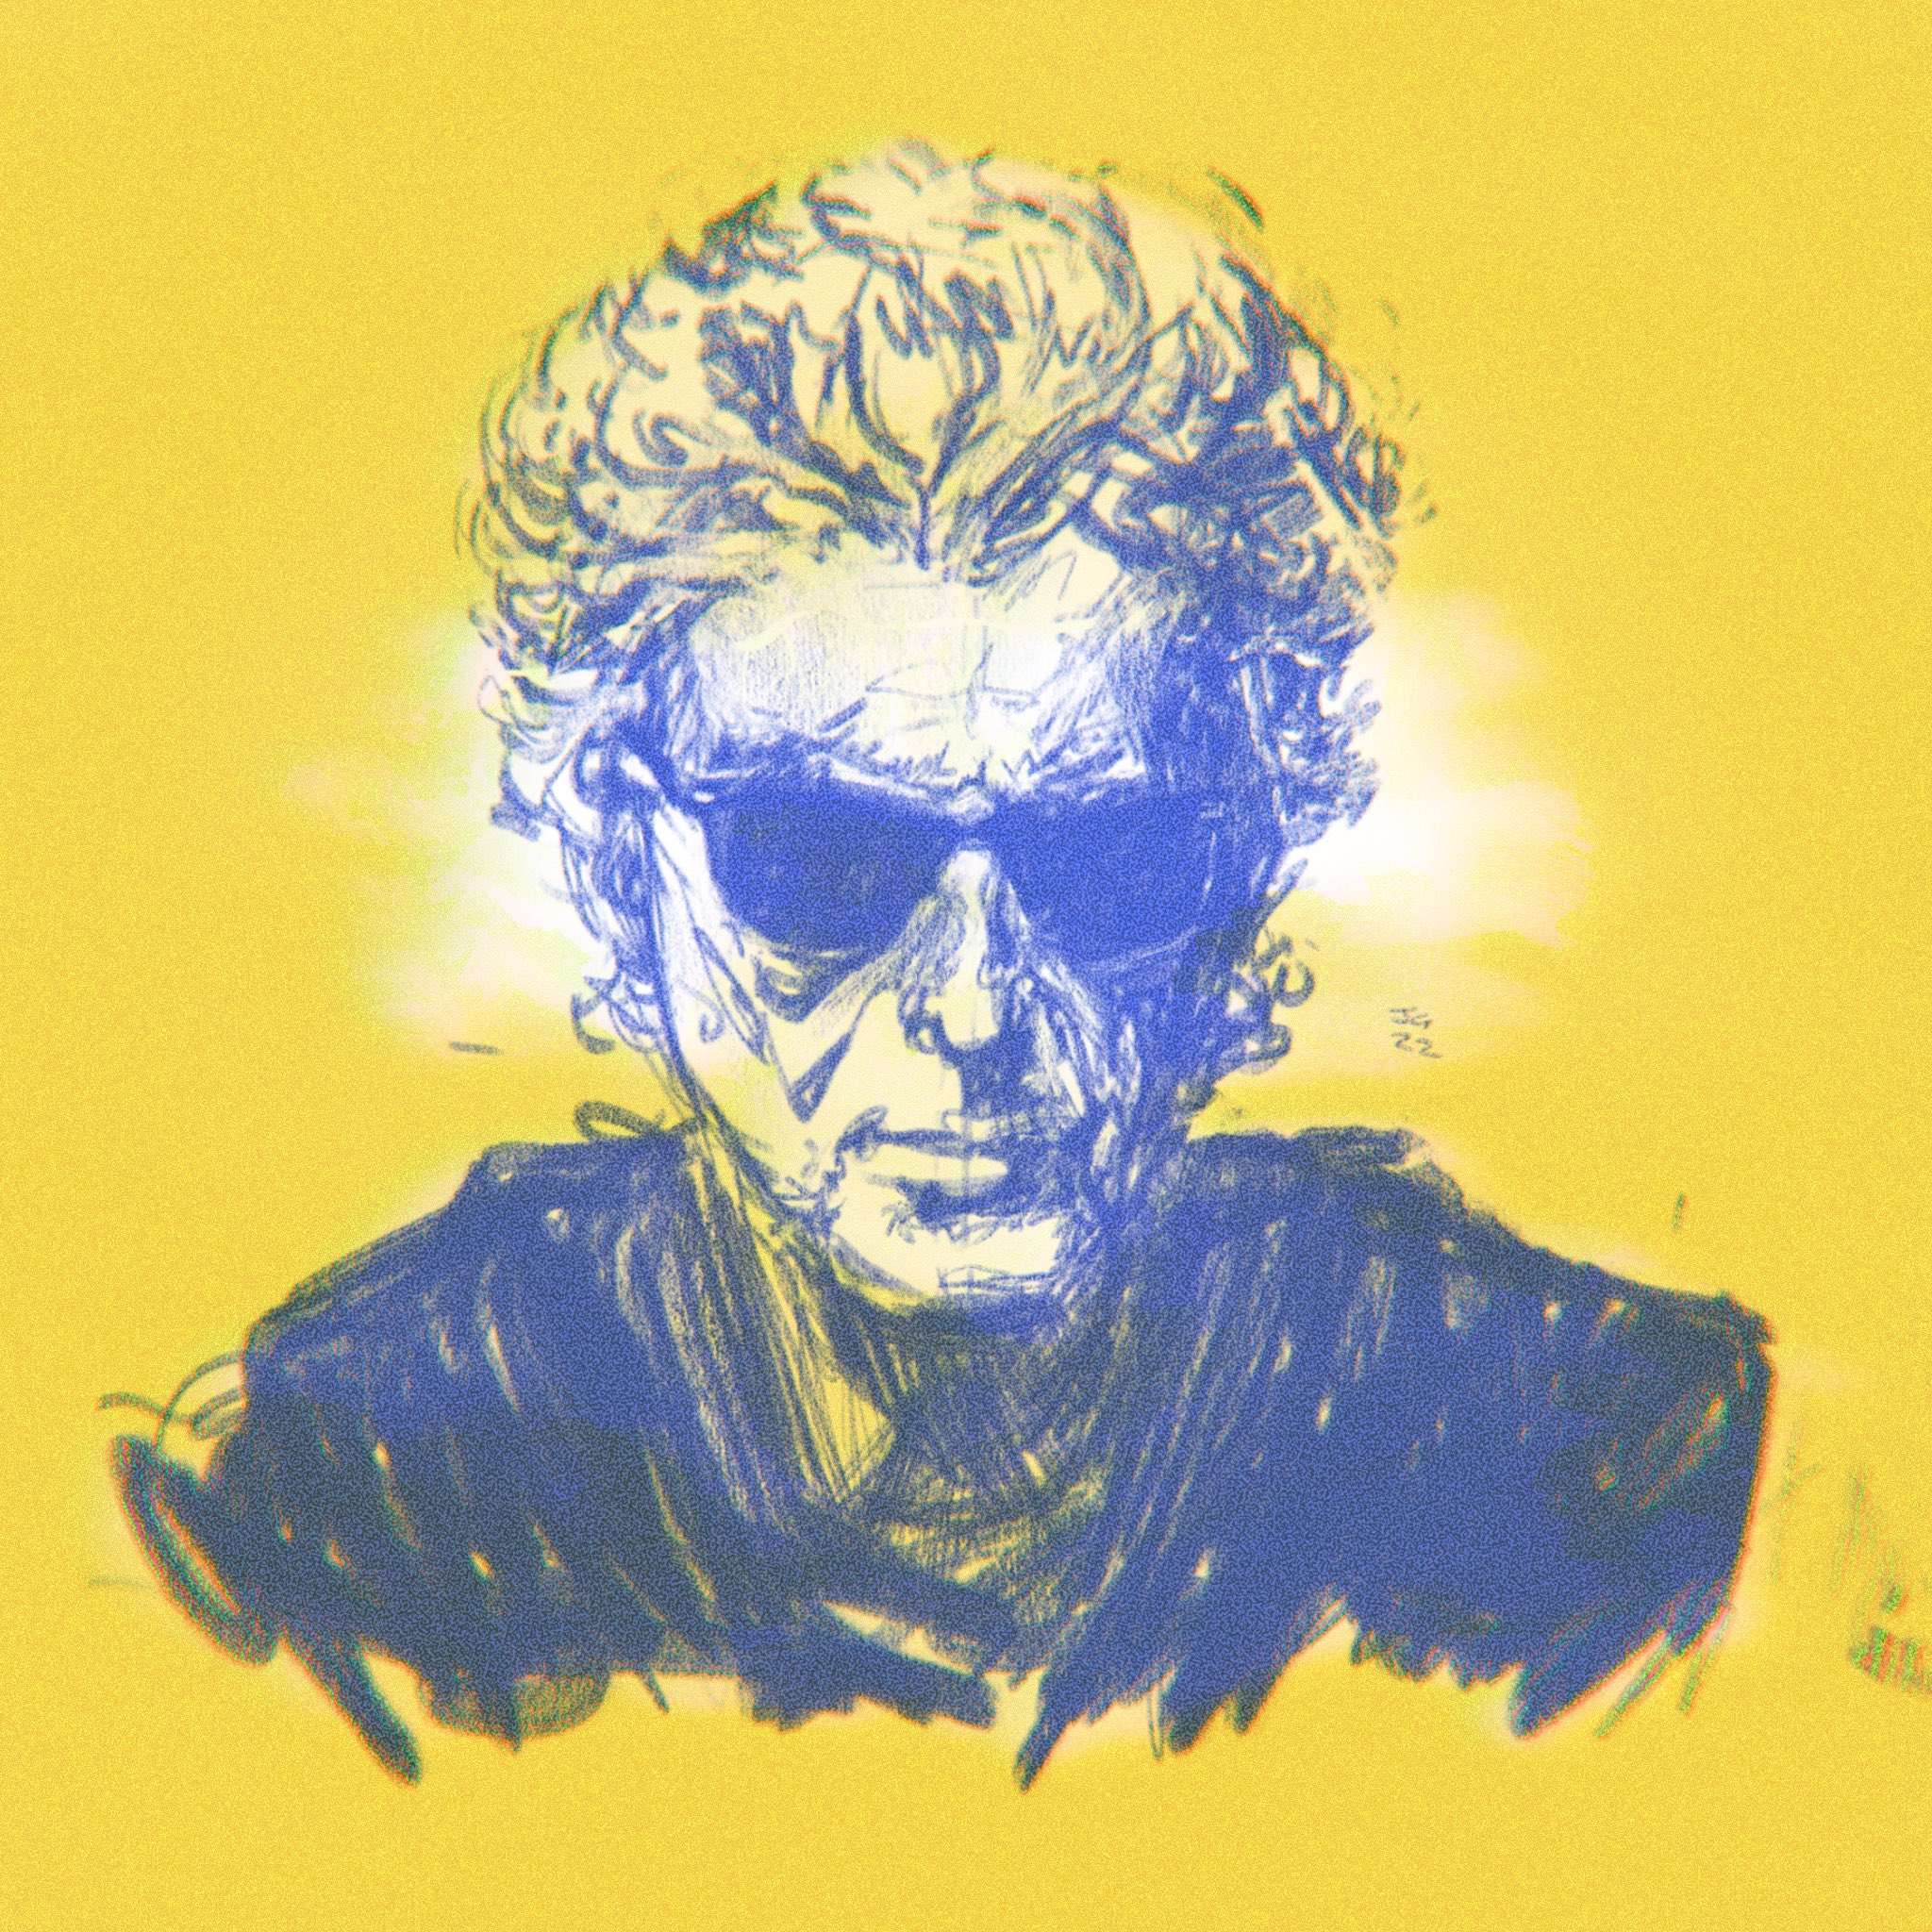 26 August: "The Twelfth Doctor and his "wearable technology" 😎 #FanArtFriday 🖌️: @_Cowardly_Lion_"[42]